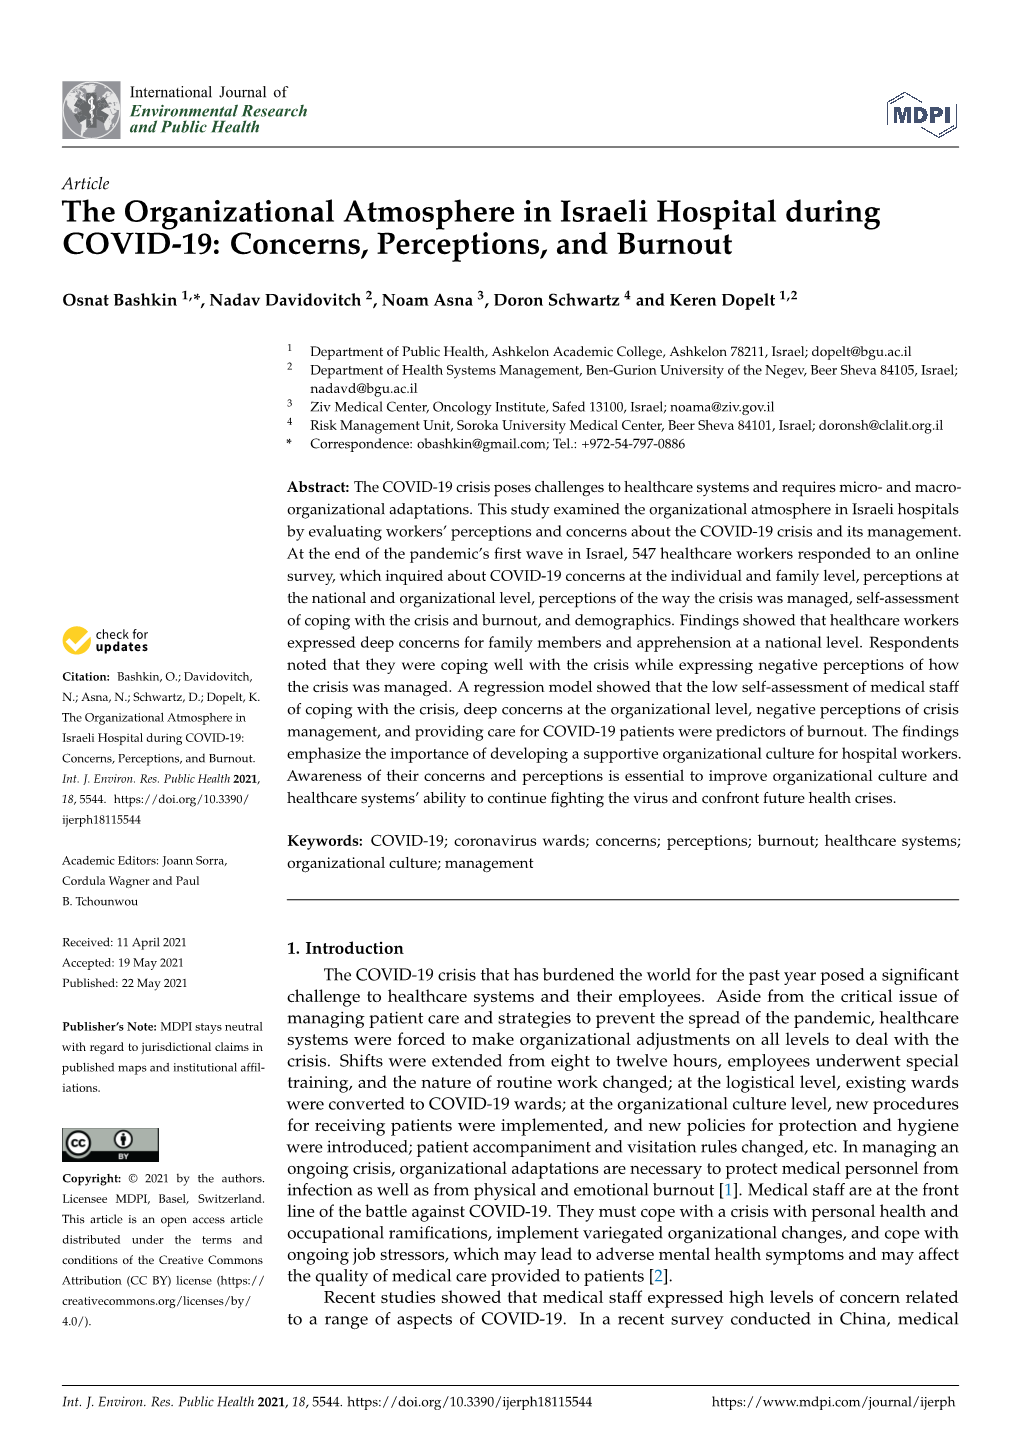 The Organizational Atmosphere in Israeli Hospital During COVID-19: Concerns, Perceptions, and Burnout